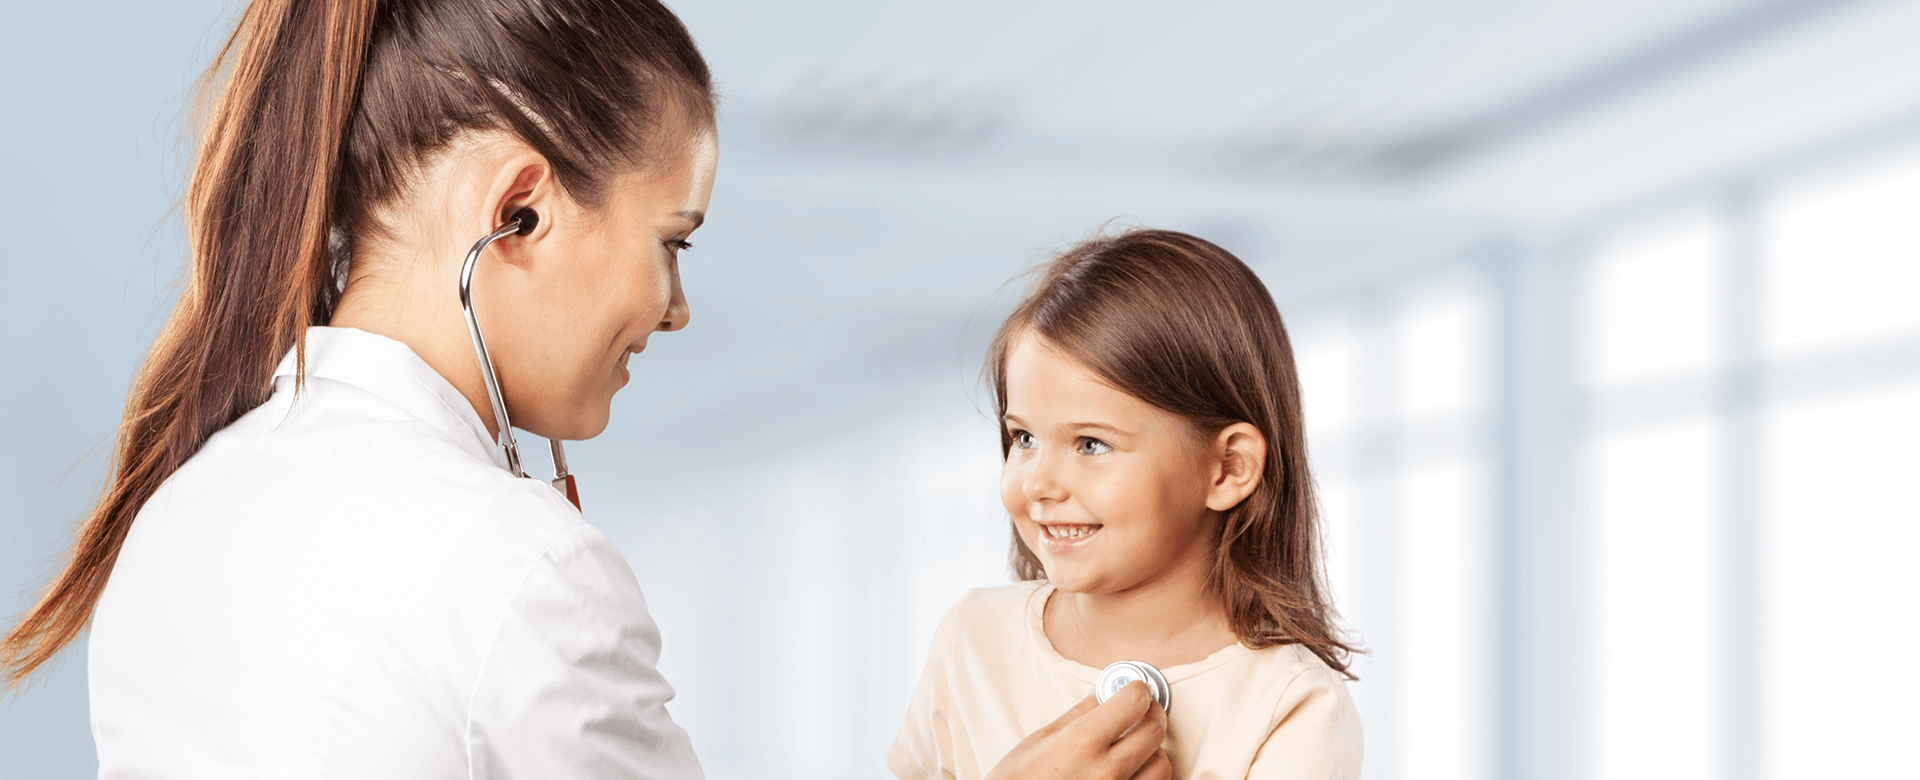 Doctor and Child - How Injectable HGH Came to Be